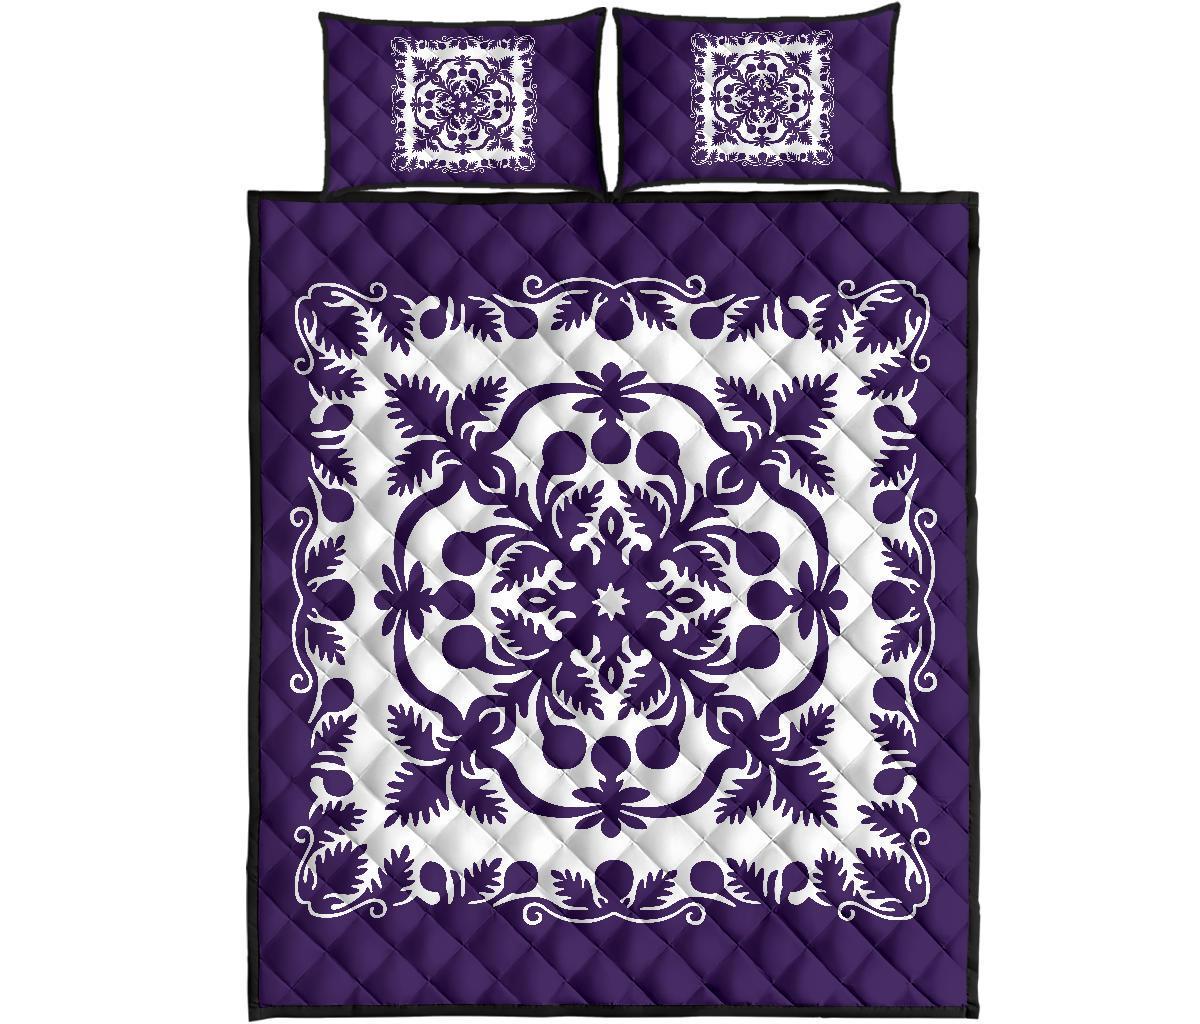 Hawaii Quilt Bed Set Royal Pattern - Purple And White Art - Polynesian Pride